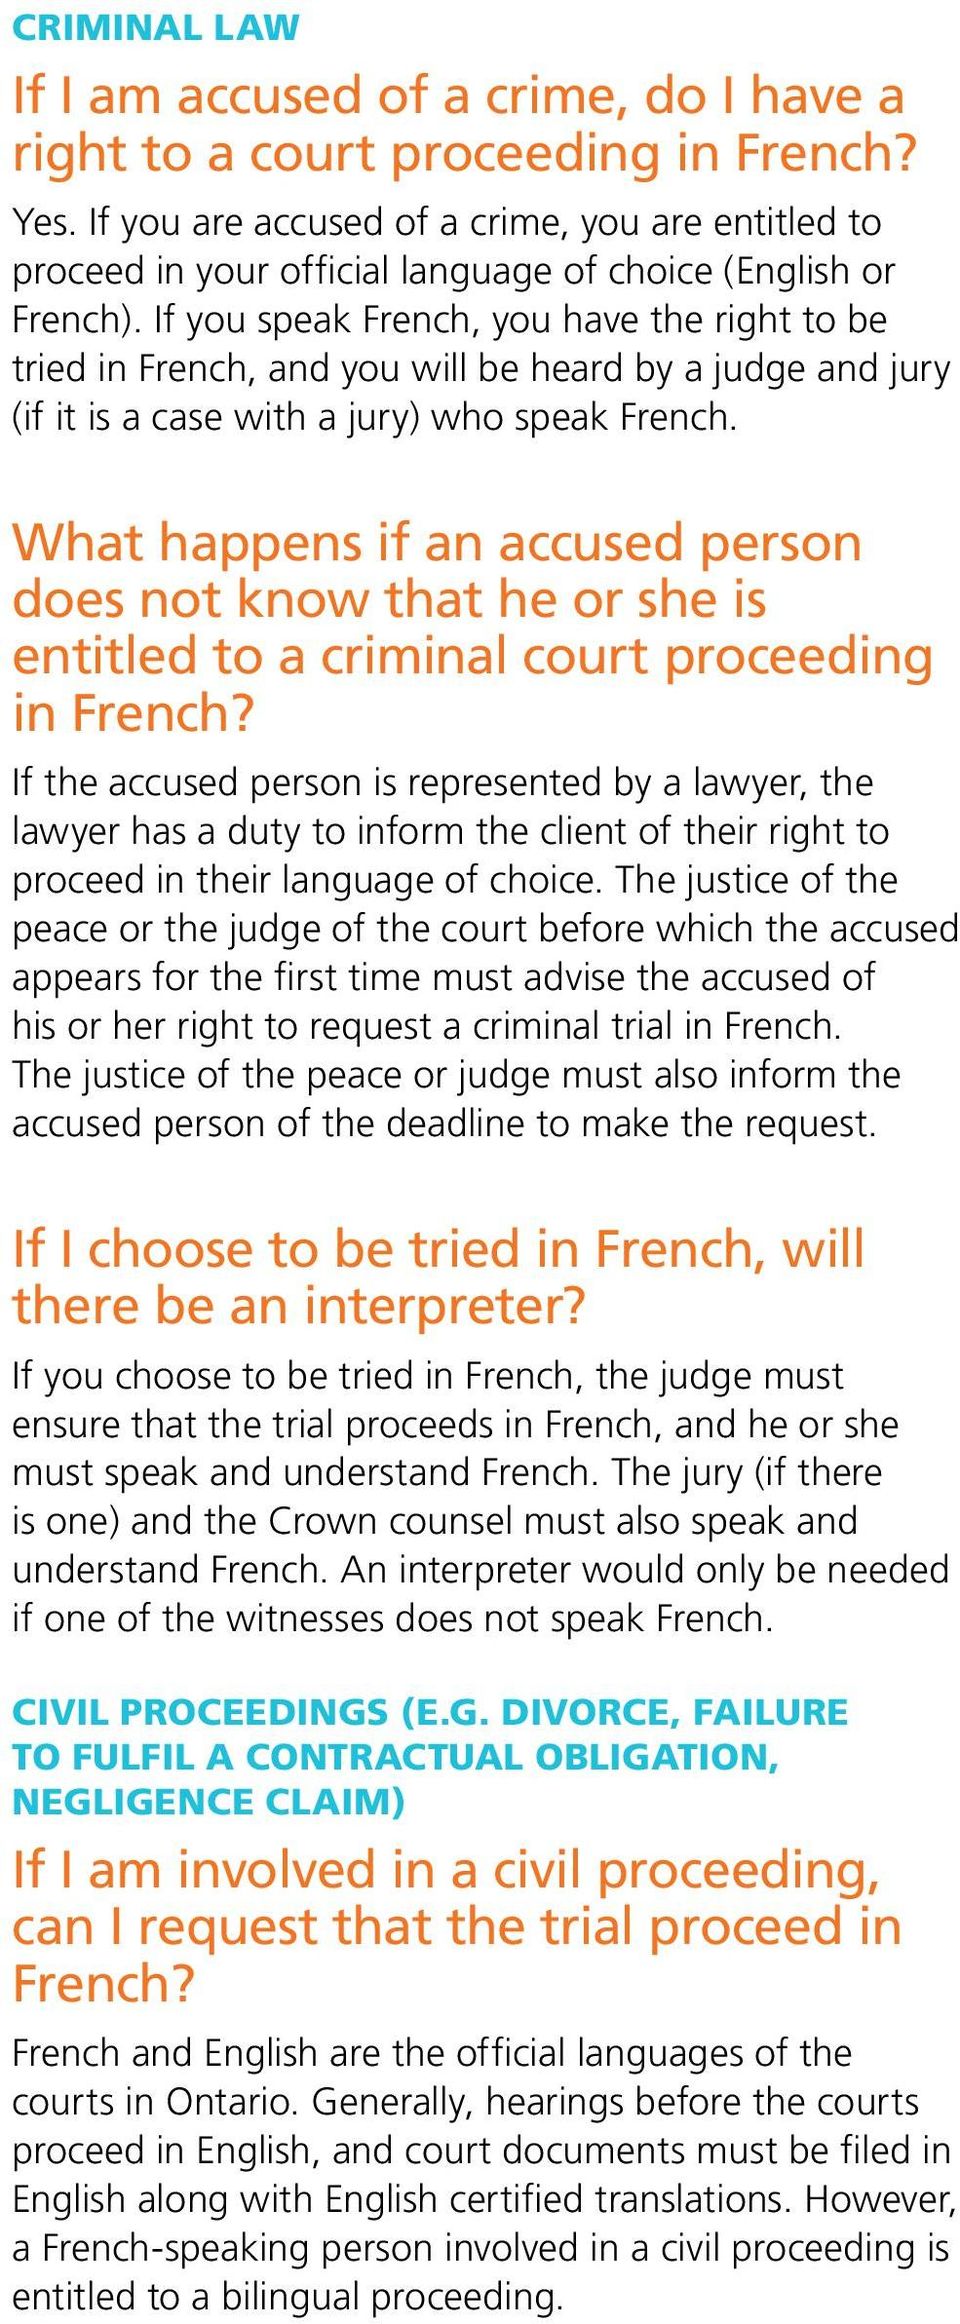 If you speak French, you have the right to be tried in French, and you will be heard by a judge and jury (if it is a case with a jury) who speak French.